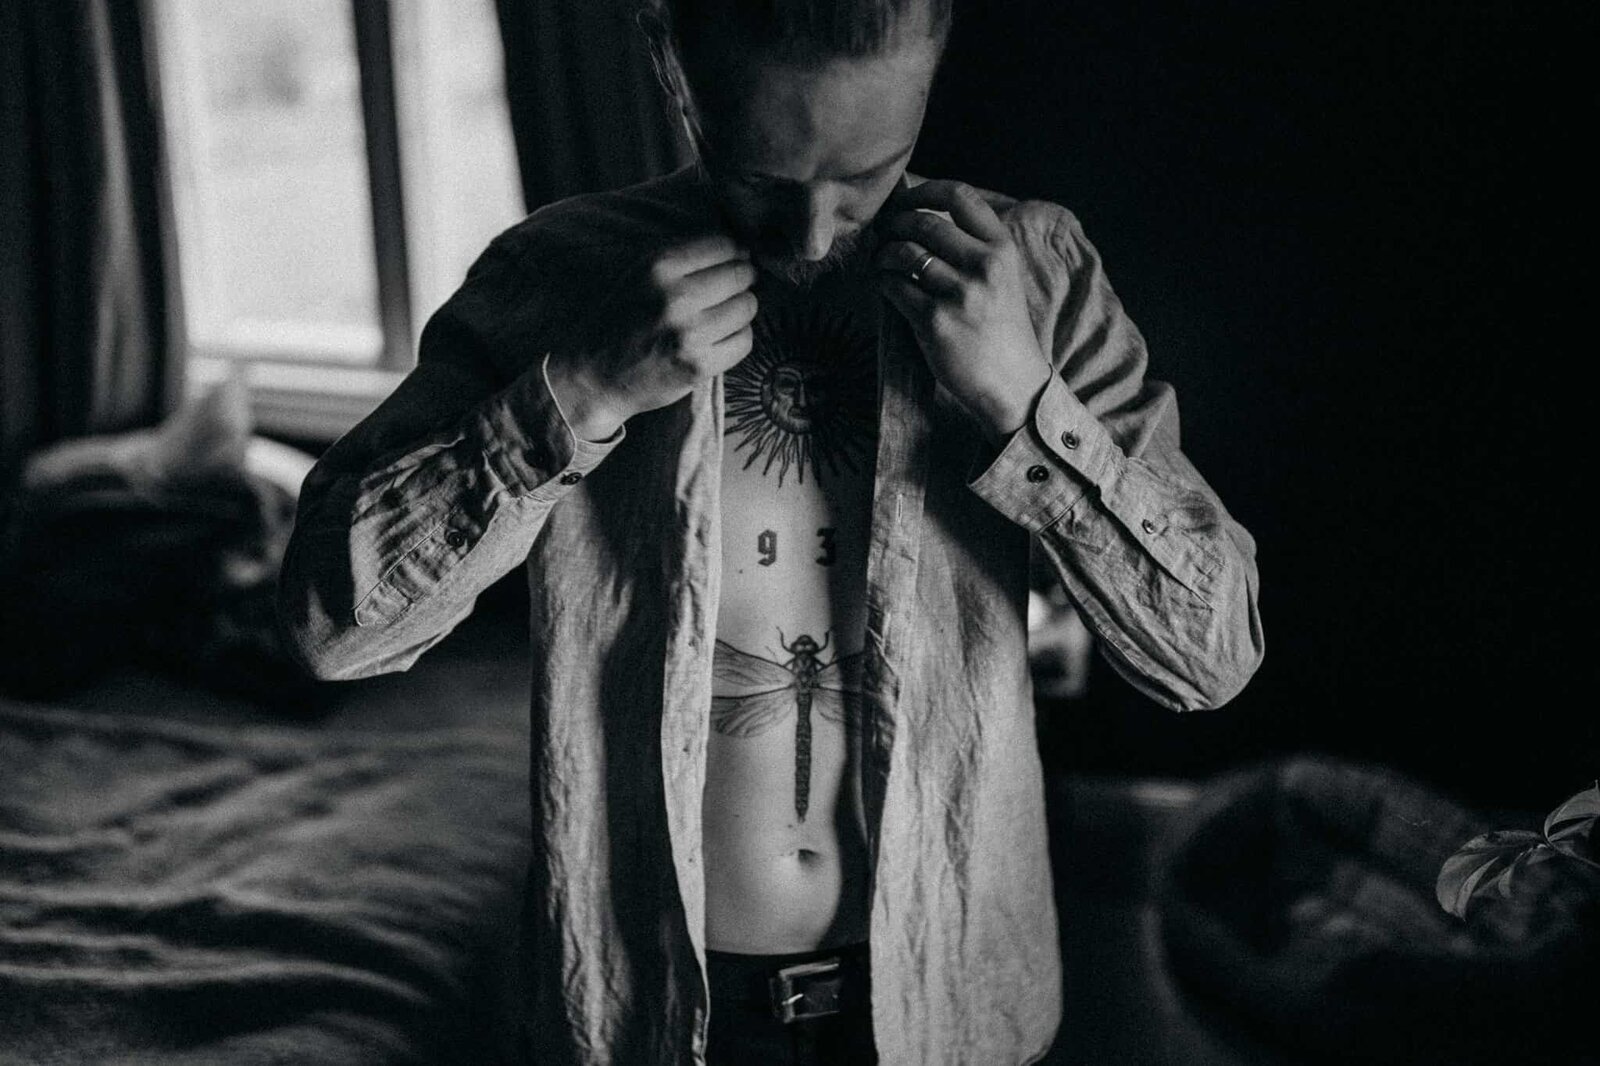 Tattooed groom getting ready in front of a window